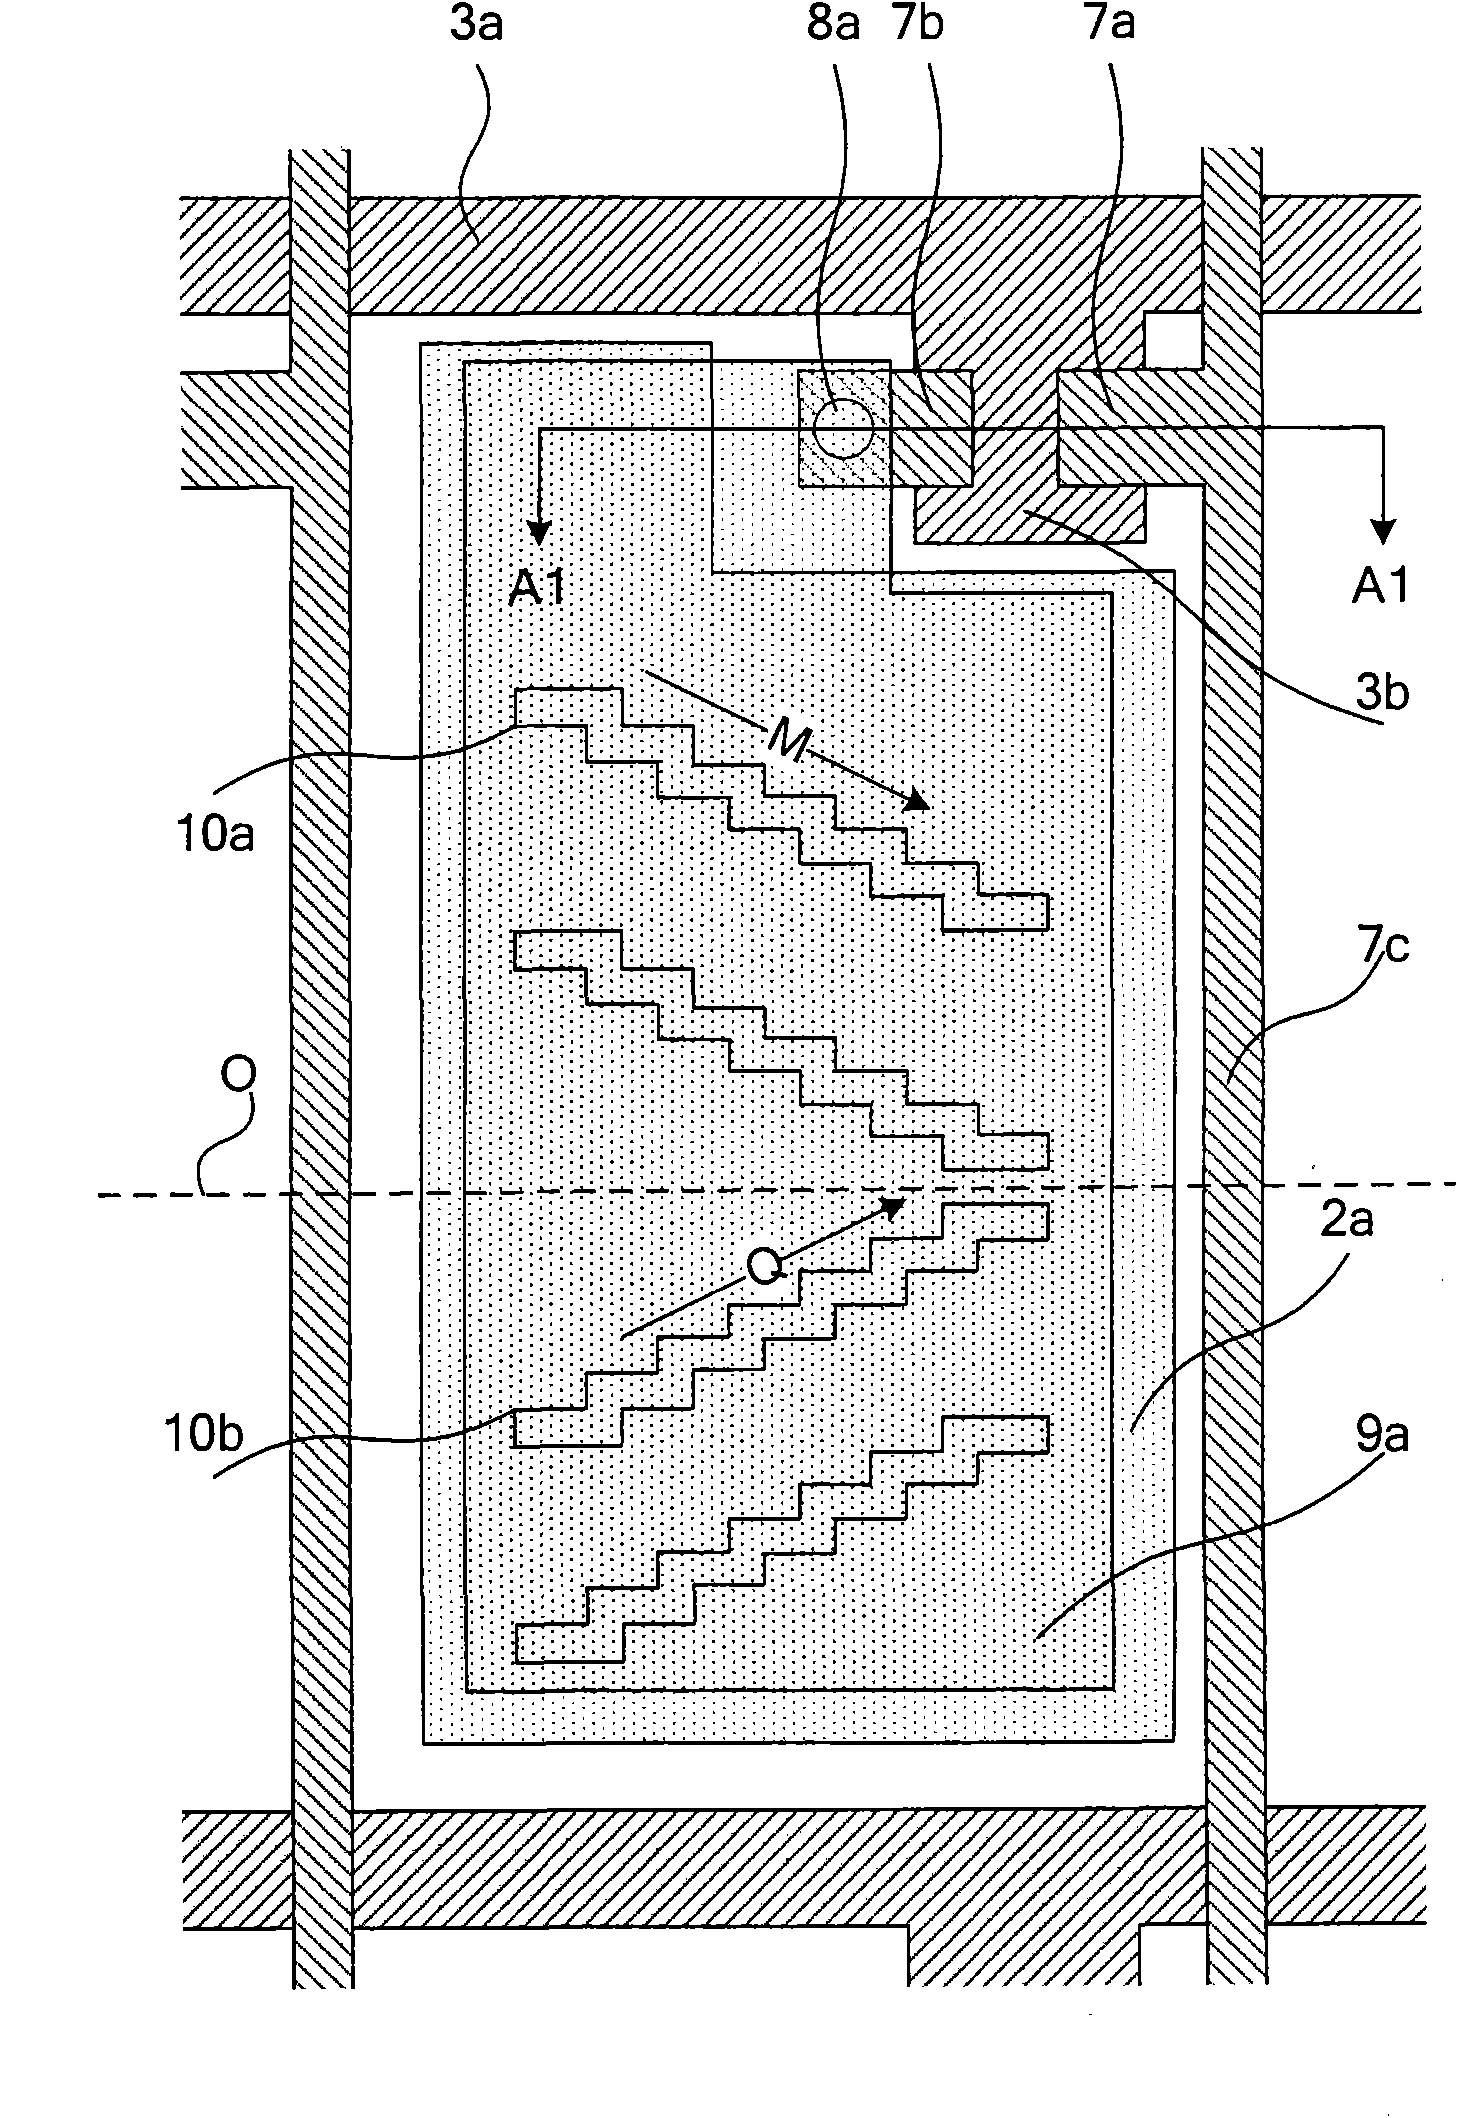 FFS (Fringe Field Switching) type TFT-LCD (Thin Film Transistor-Liquid Crystal Display) array substrate and manufacturing method thereof